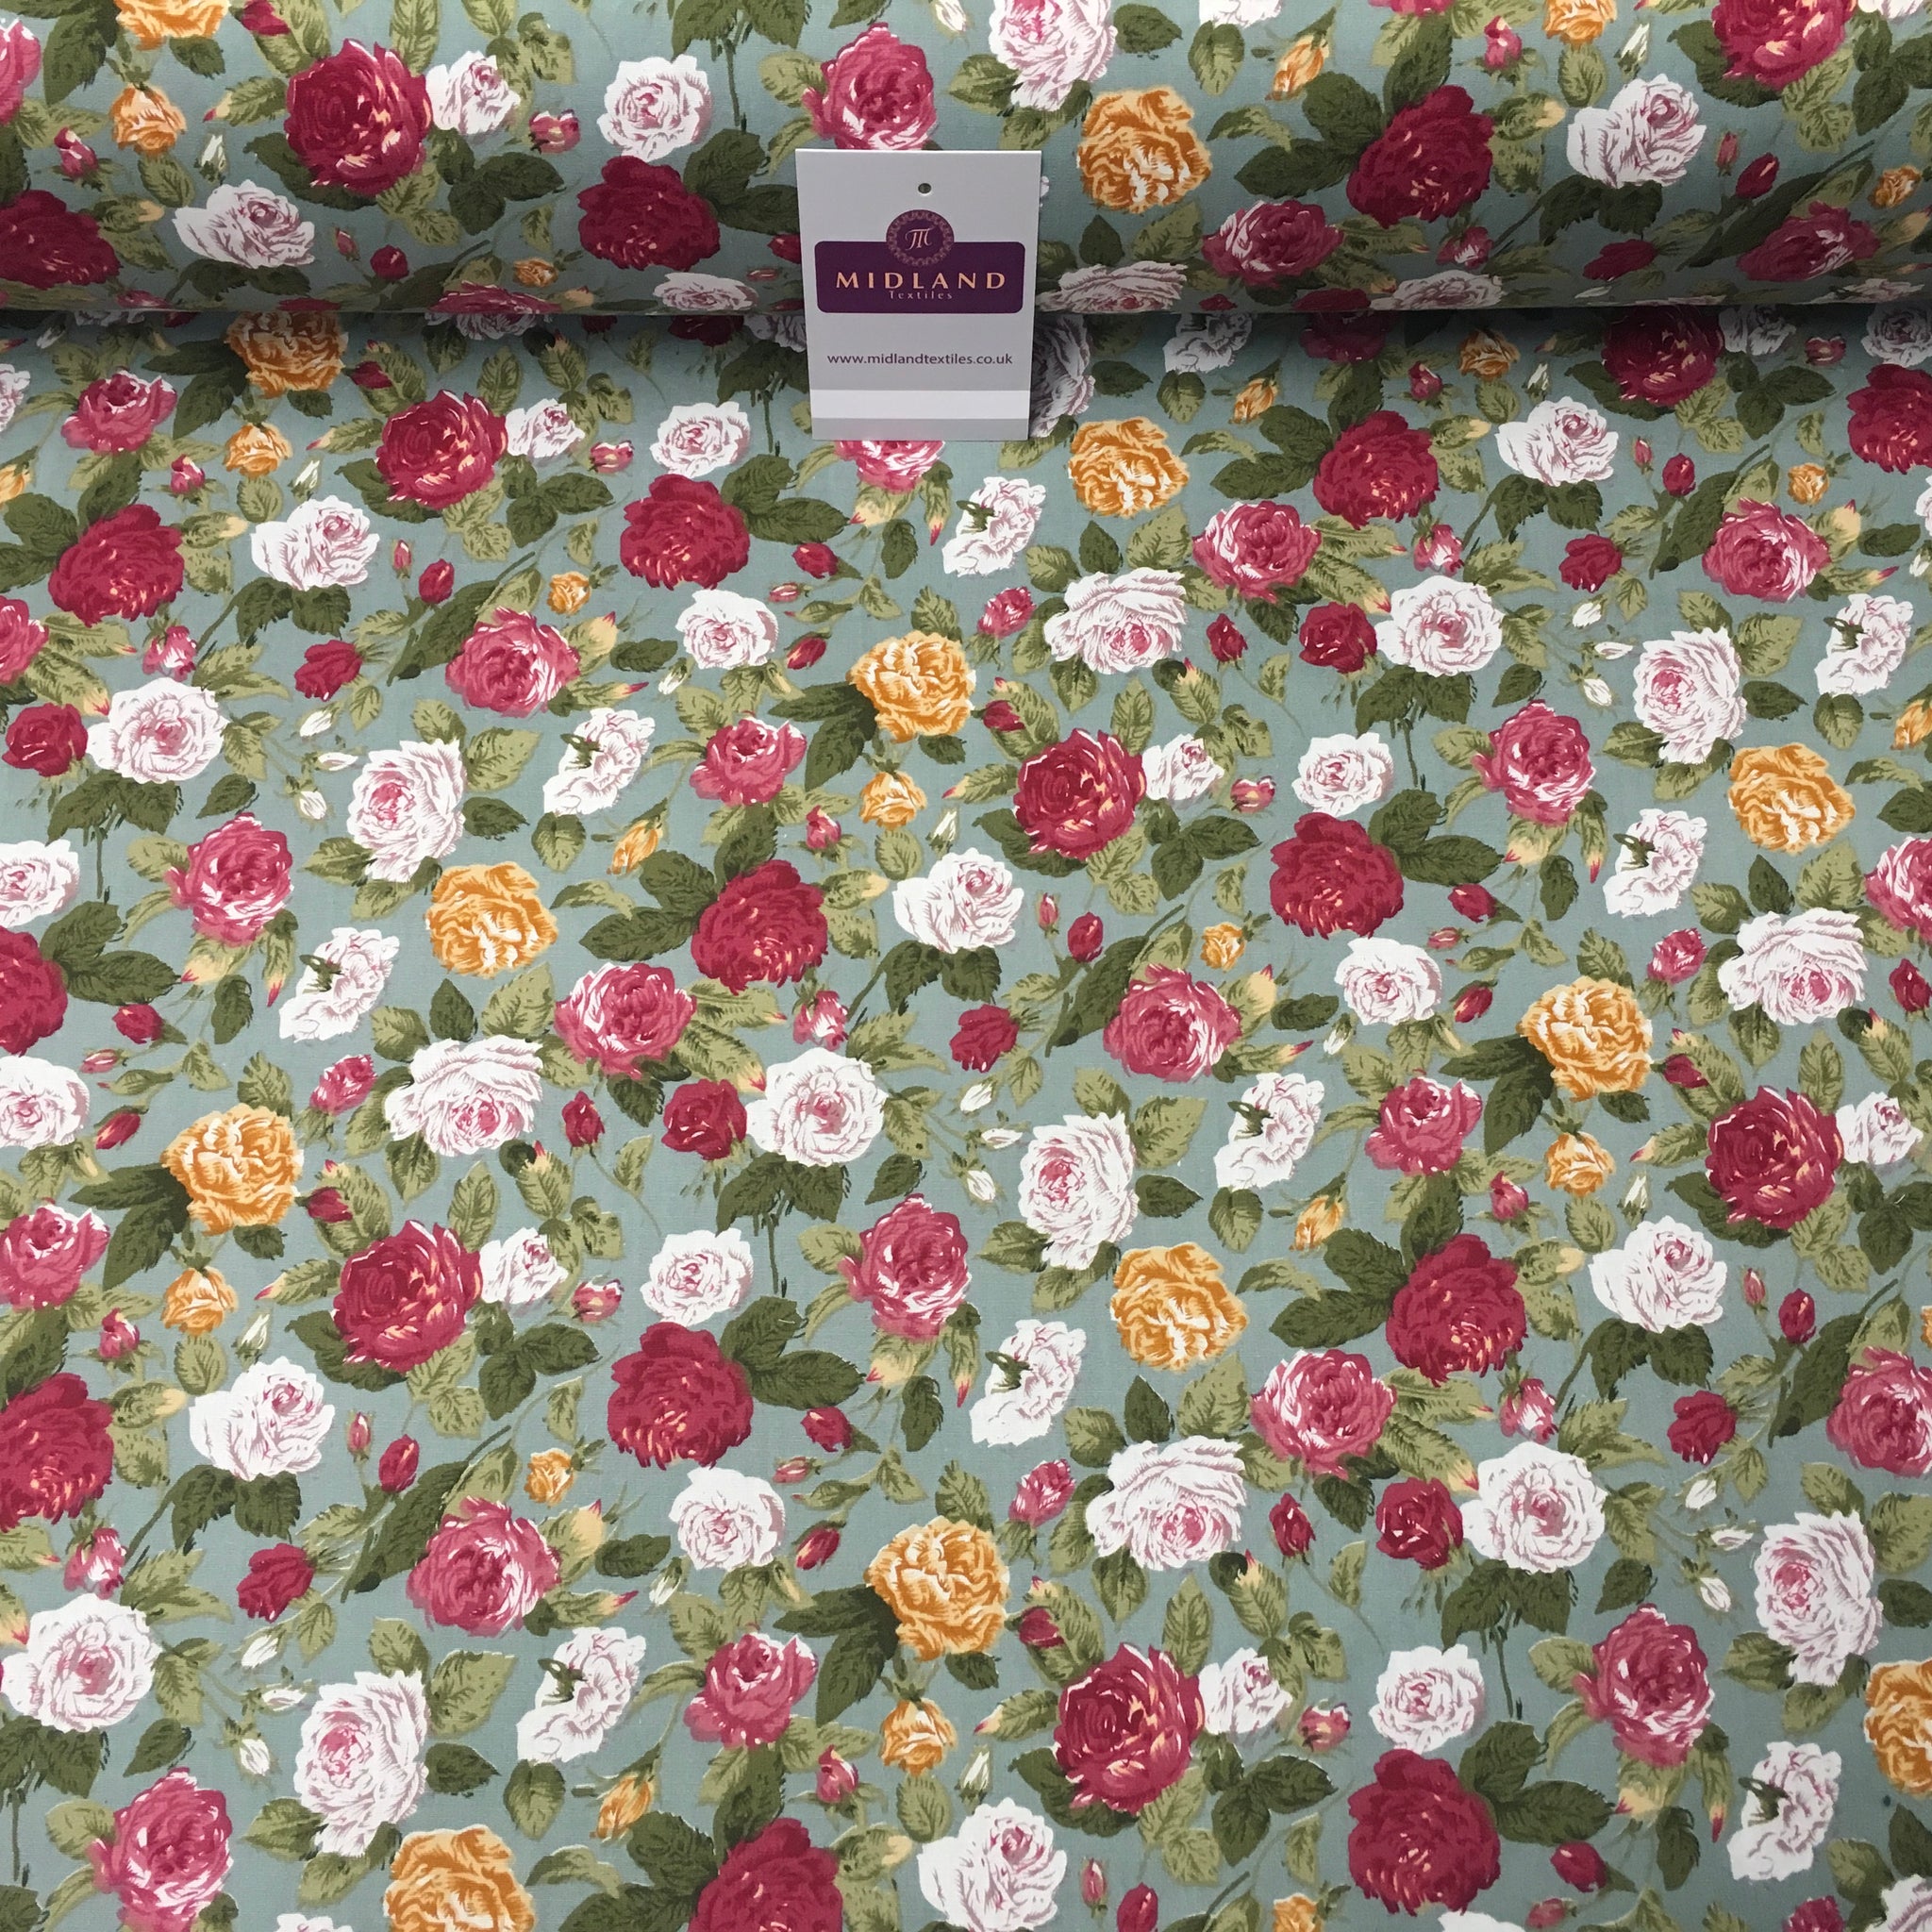 Floral Vintage Shabby Chic Printed 100% Cotton Fabric 58" Wide MA911 Mtex